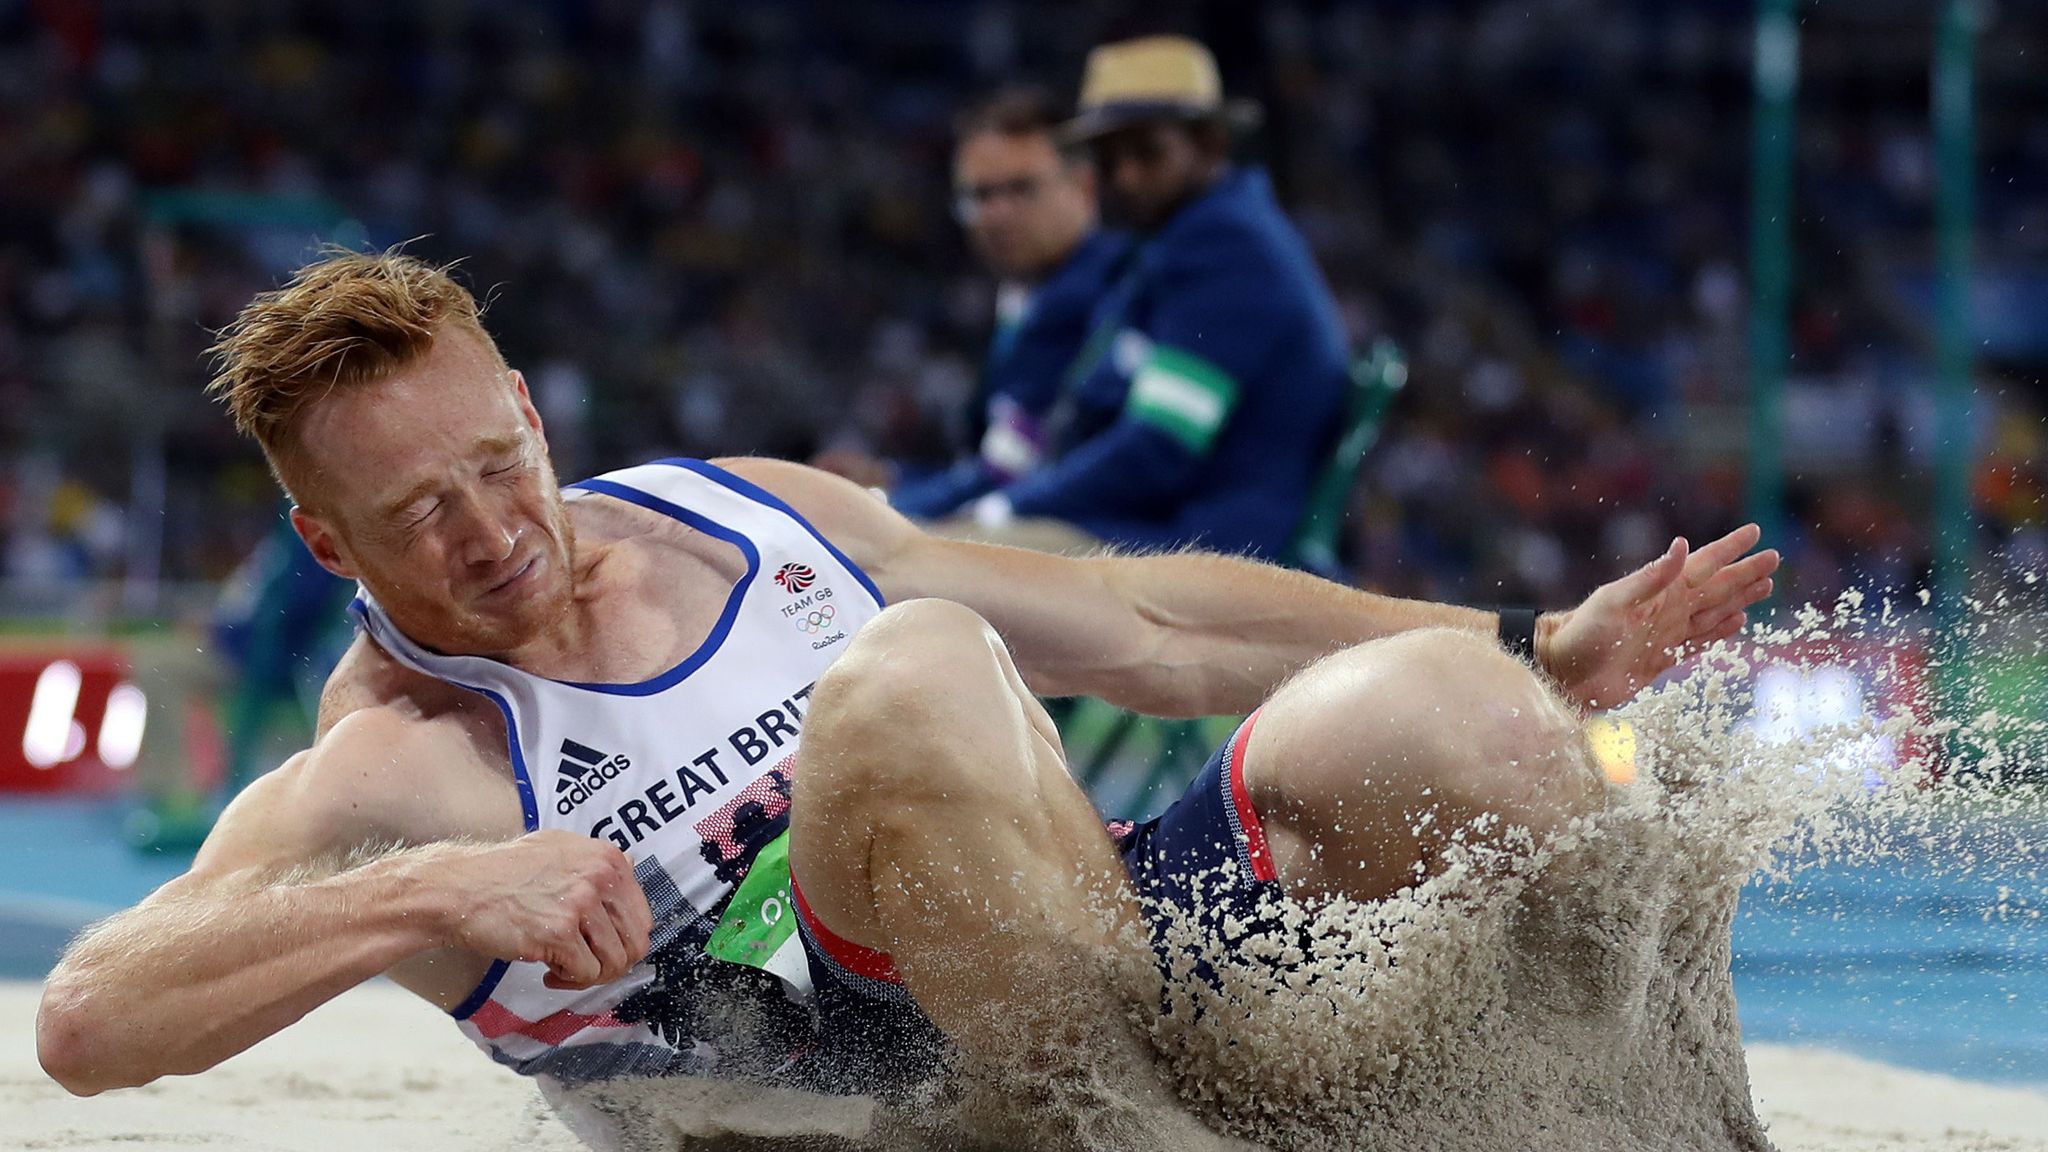 Greg Rutherford Wallpapers